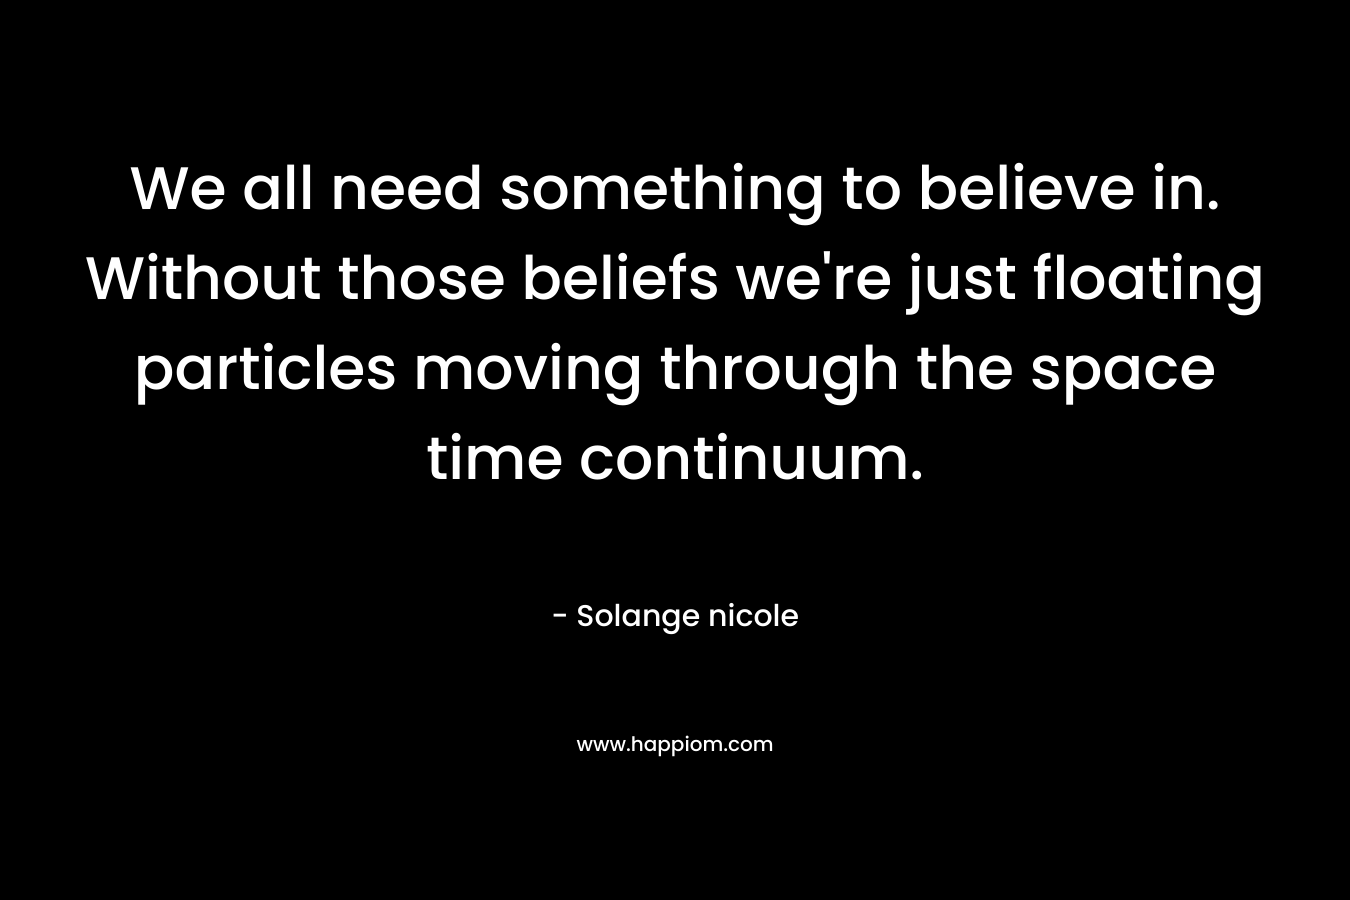 We all need something to believe in. Without those beliefs we’re just floating particles moving through the space time continuum. – Solange nicole